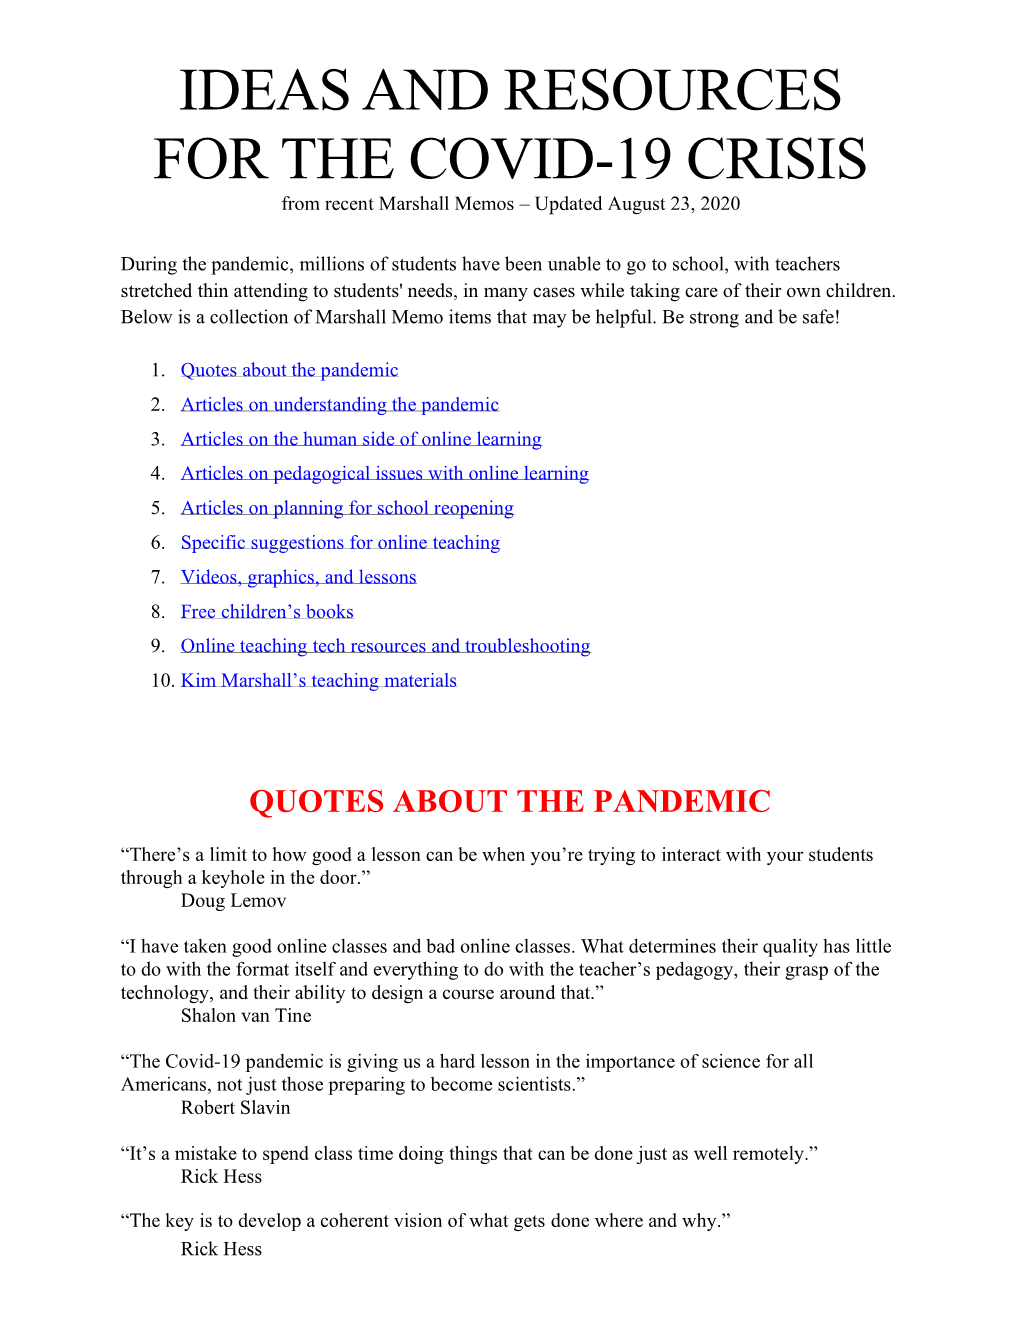 IDEAS and RESOURCES for the COVID-19 CRISIS from Recent Marshall Memos – Updated August 23, 2020